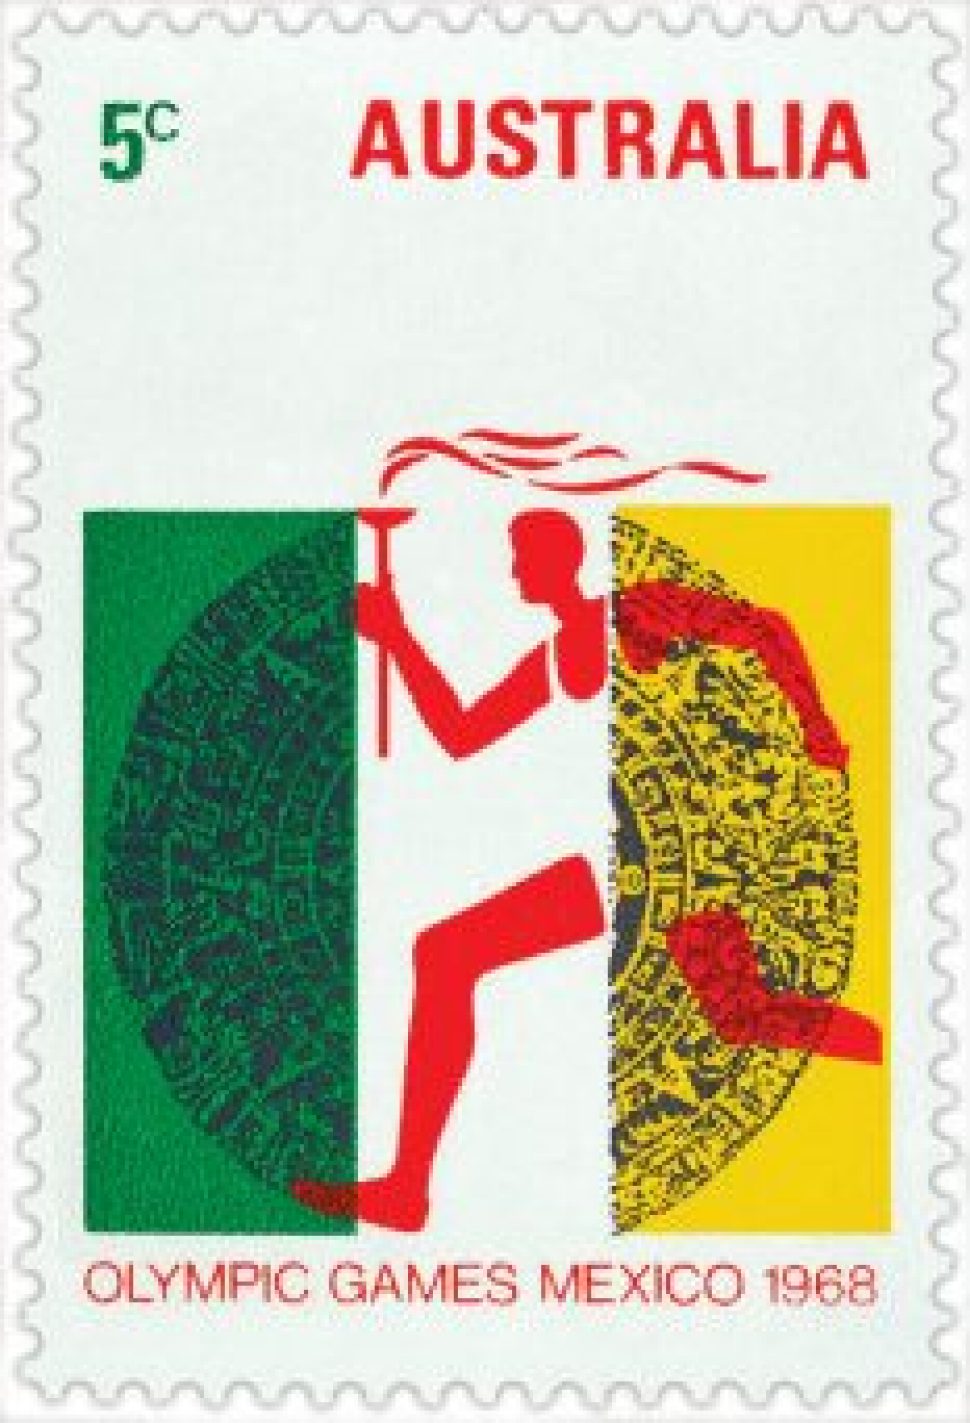 1968 Olympic Games Mexico 5c stamp